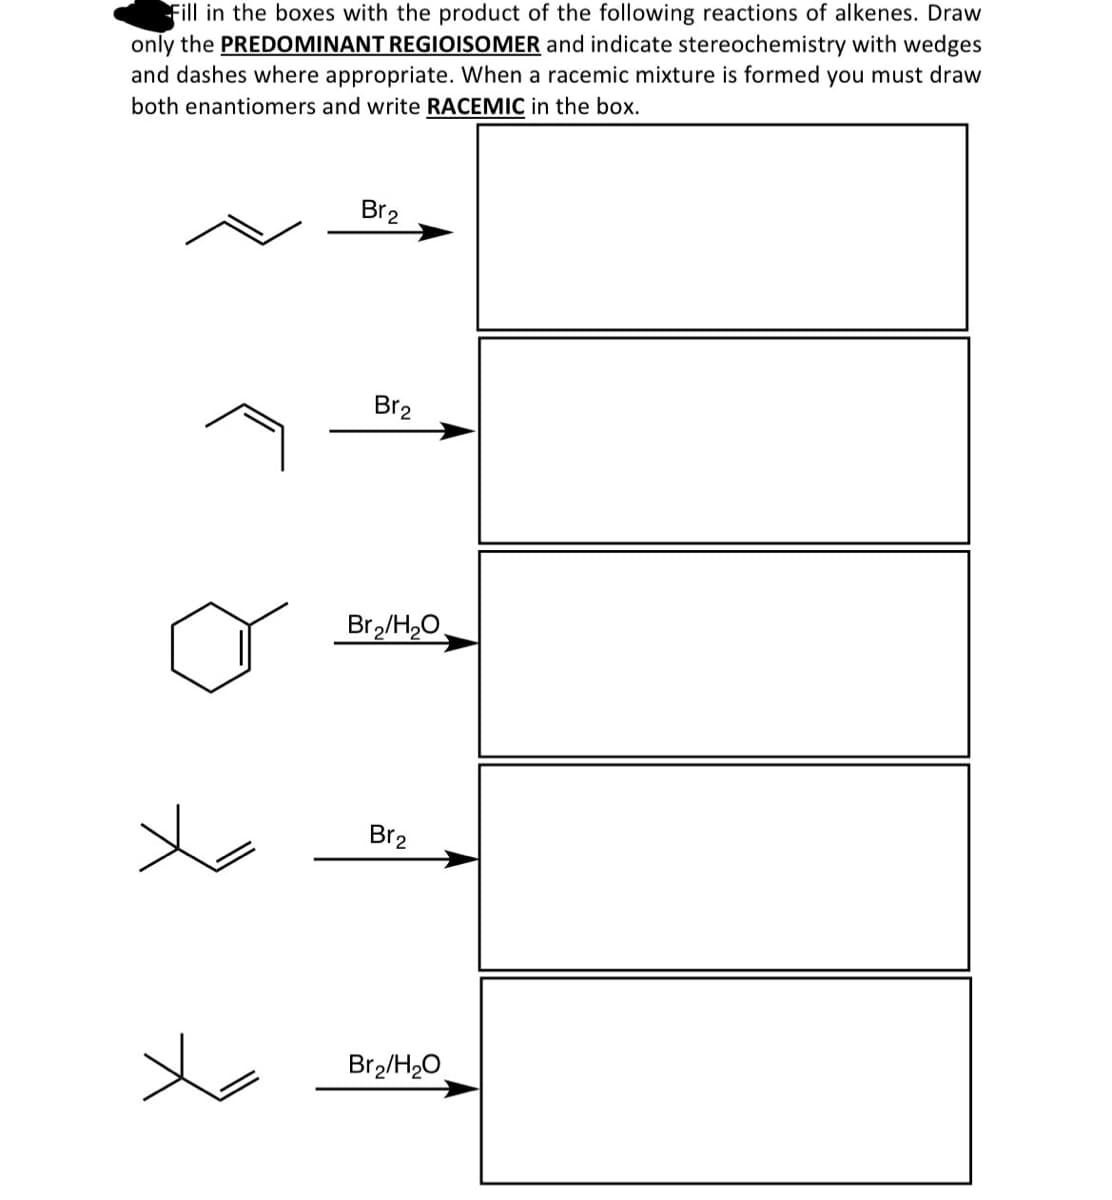 Fill in the boxes with the product of the following reactions of alkenes. Draw
only the PREDOMINANT REGIOISOMER and indicate stereochemistry with wedges
and dashes where appropriate. When a racemic mixture is formed you must draw
both enantiomers and write RACEMIC in the box.
علا
Br2
Br2
Br2/H₂O
Br2
Br2/H₂O